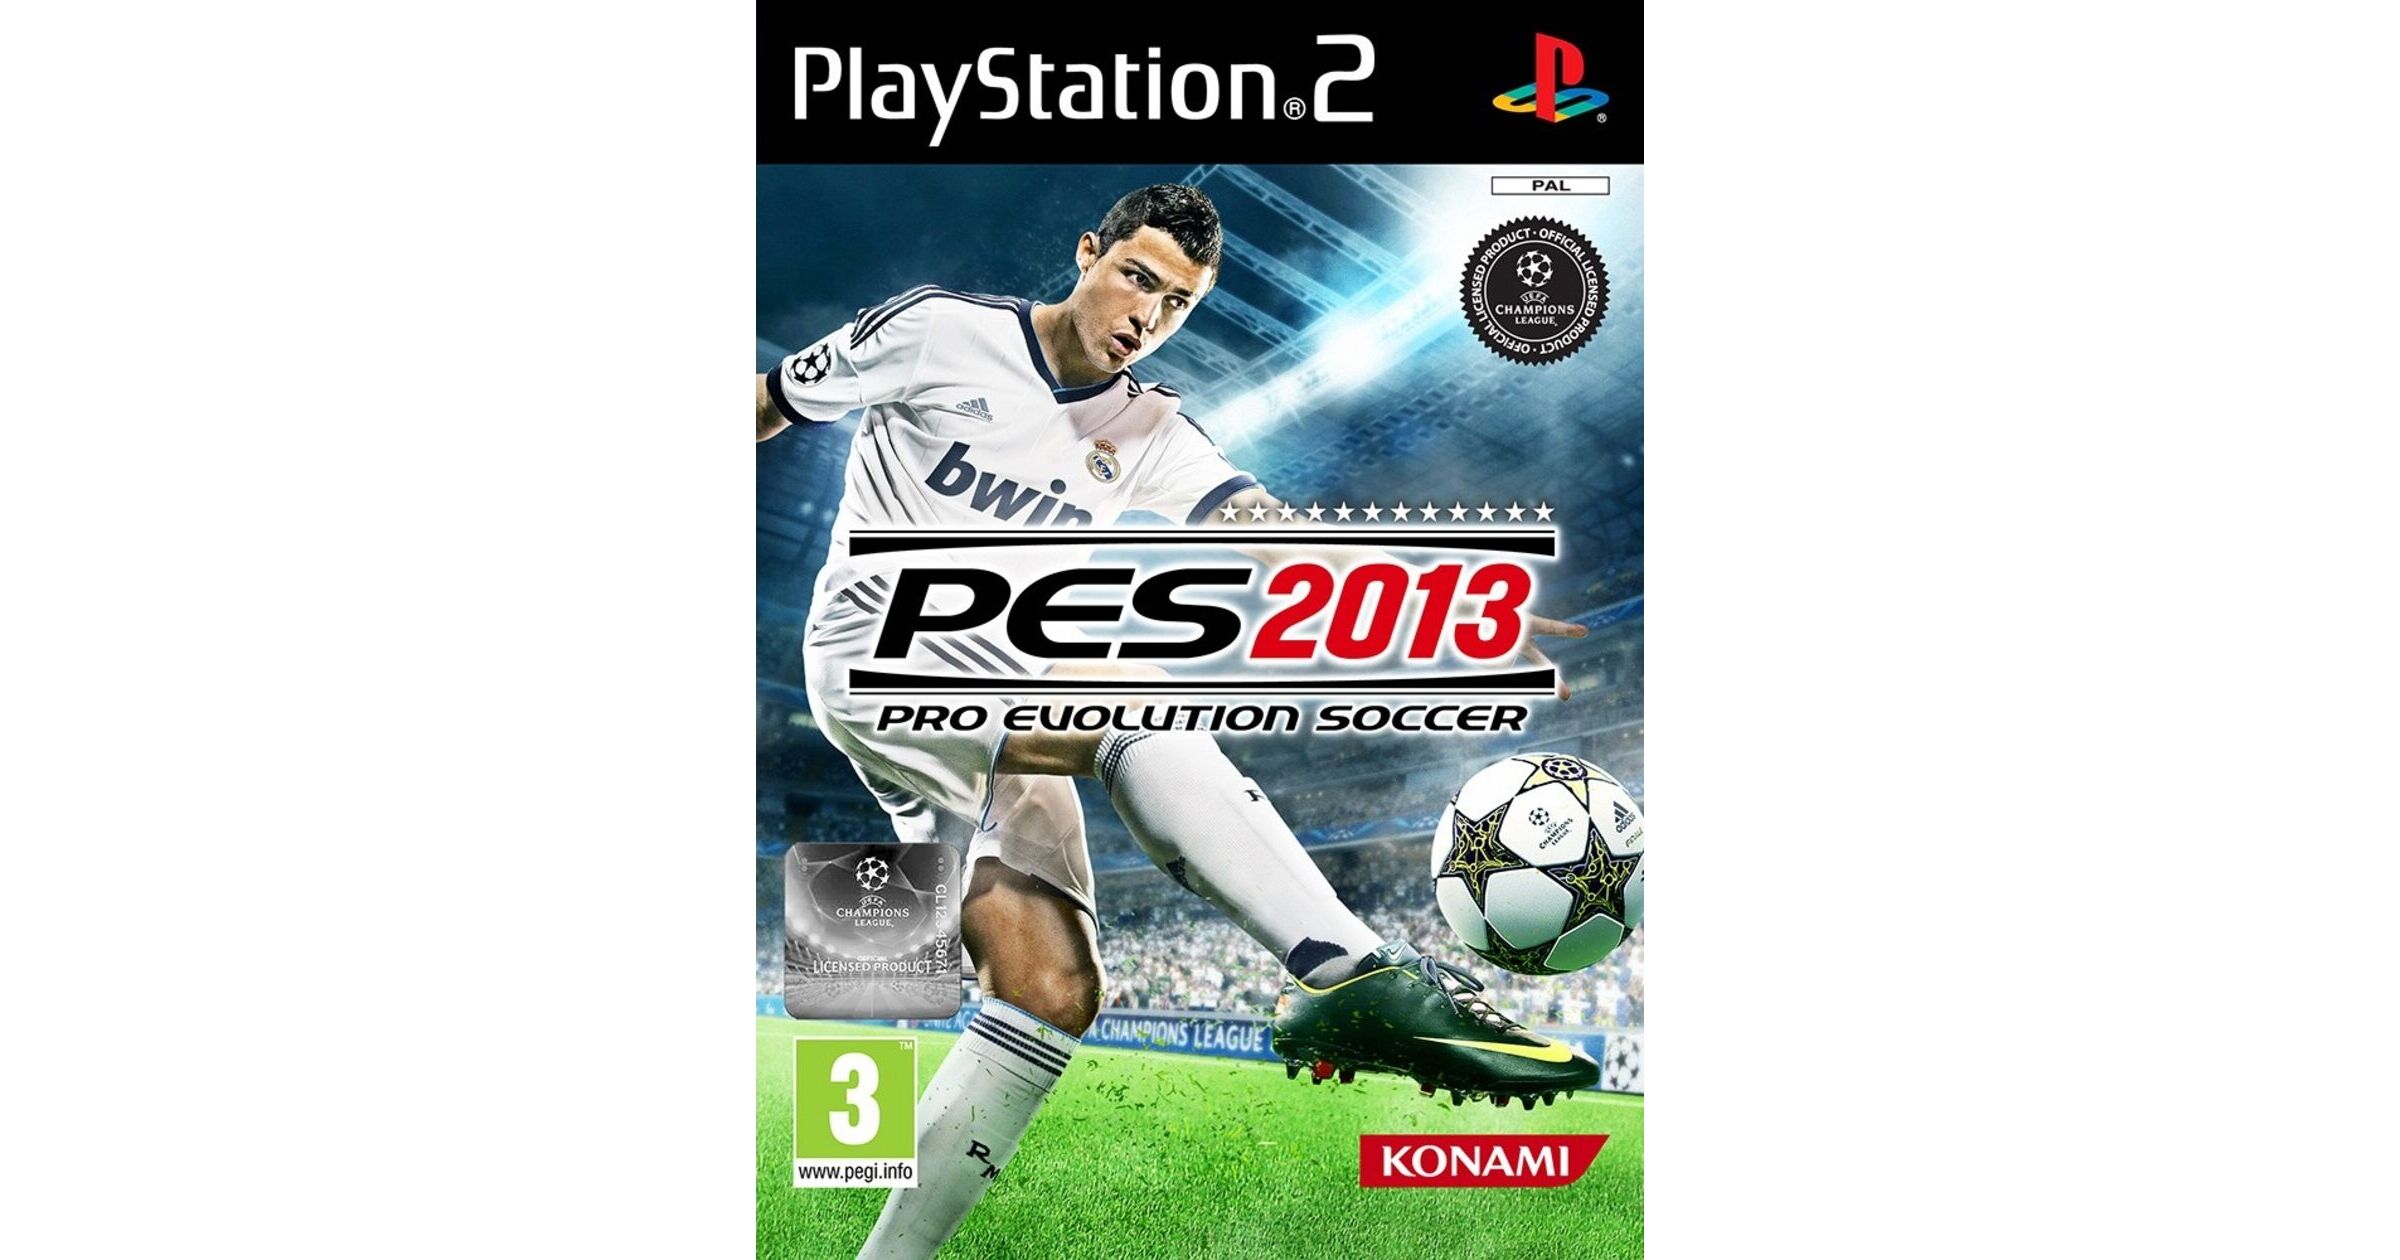 Pro Evolution Soccer 2013 PS2 (AetherSX2) Champions League Final 